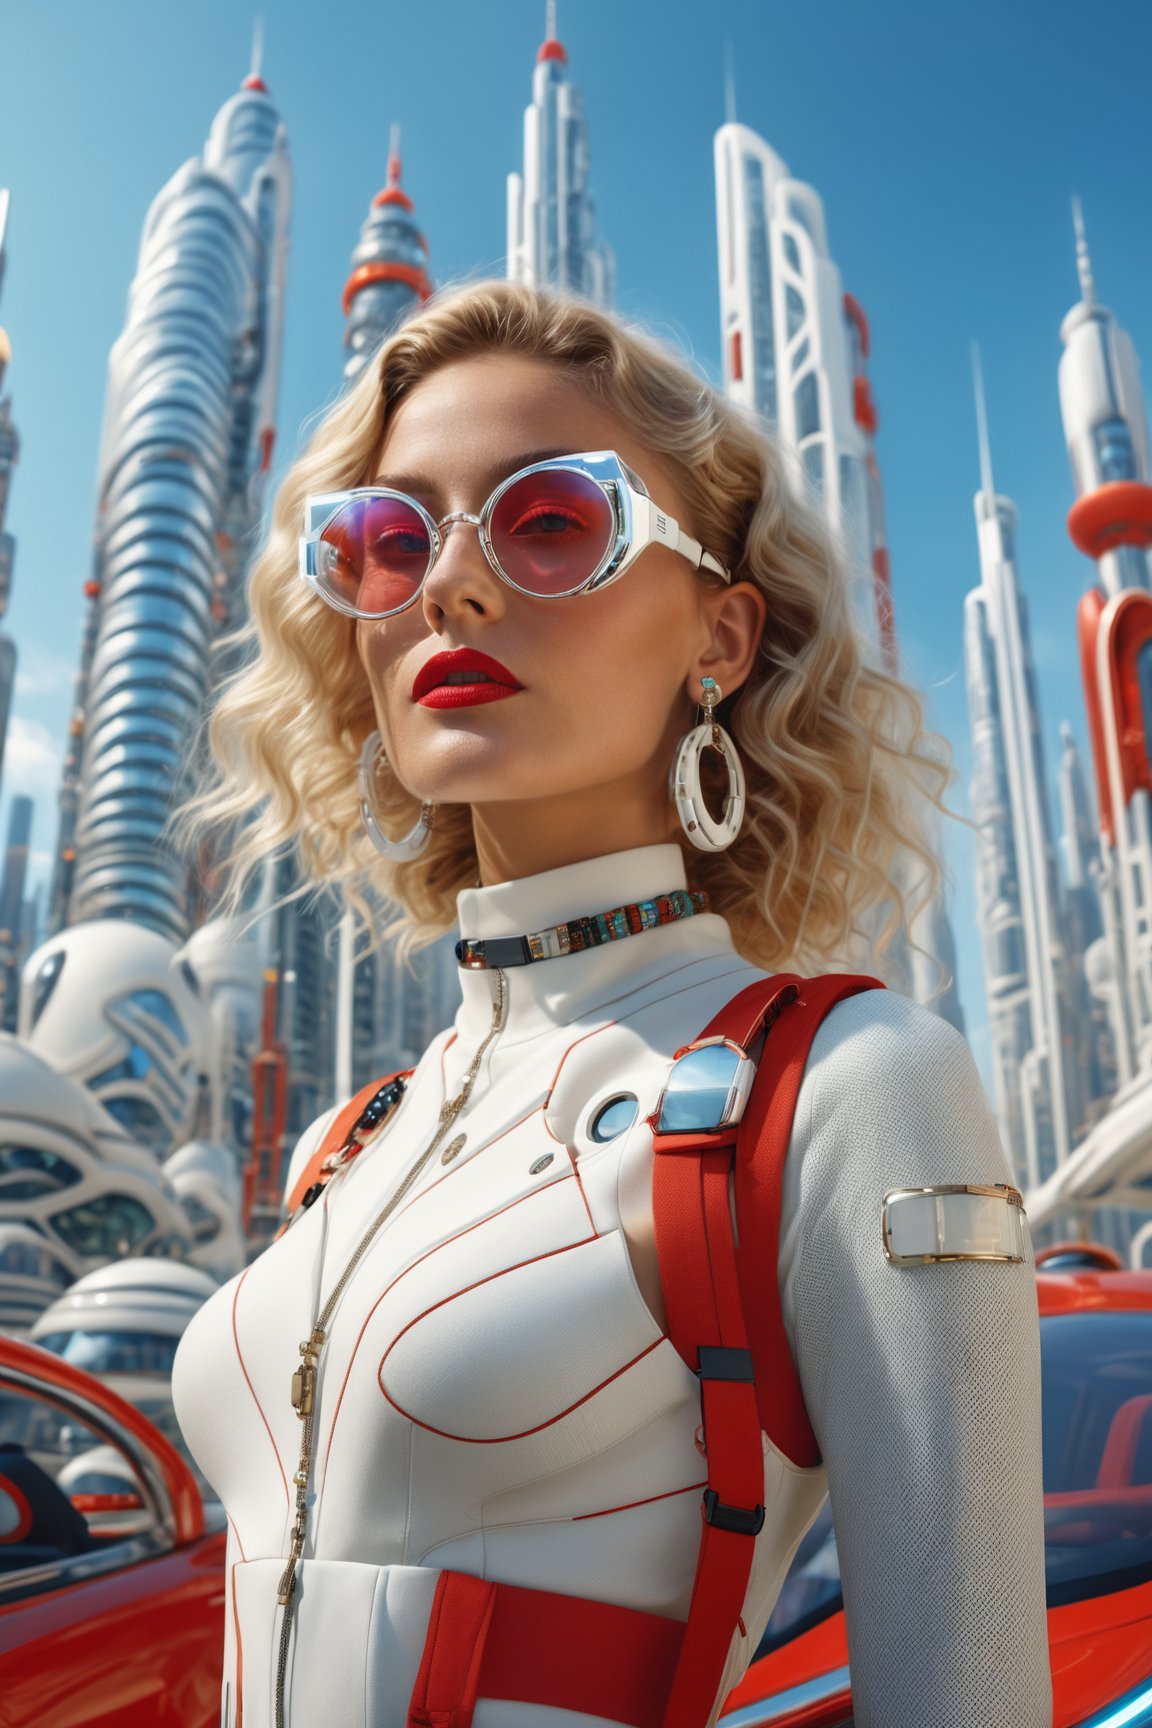 A young woman with wavy blonde hair, wearing round glasses, a white and red outfit, and various accessories like earrings and a choker. She stands in front of a futuristic cityscape with tall buildings, intricate designs, and a clear blue sky. A white car is parked behind her, and the overall ambiance suggests a vibrant and technologically advanced urban setting.